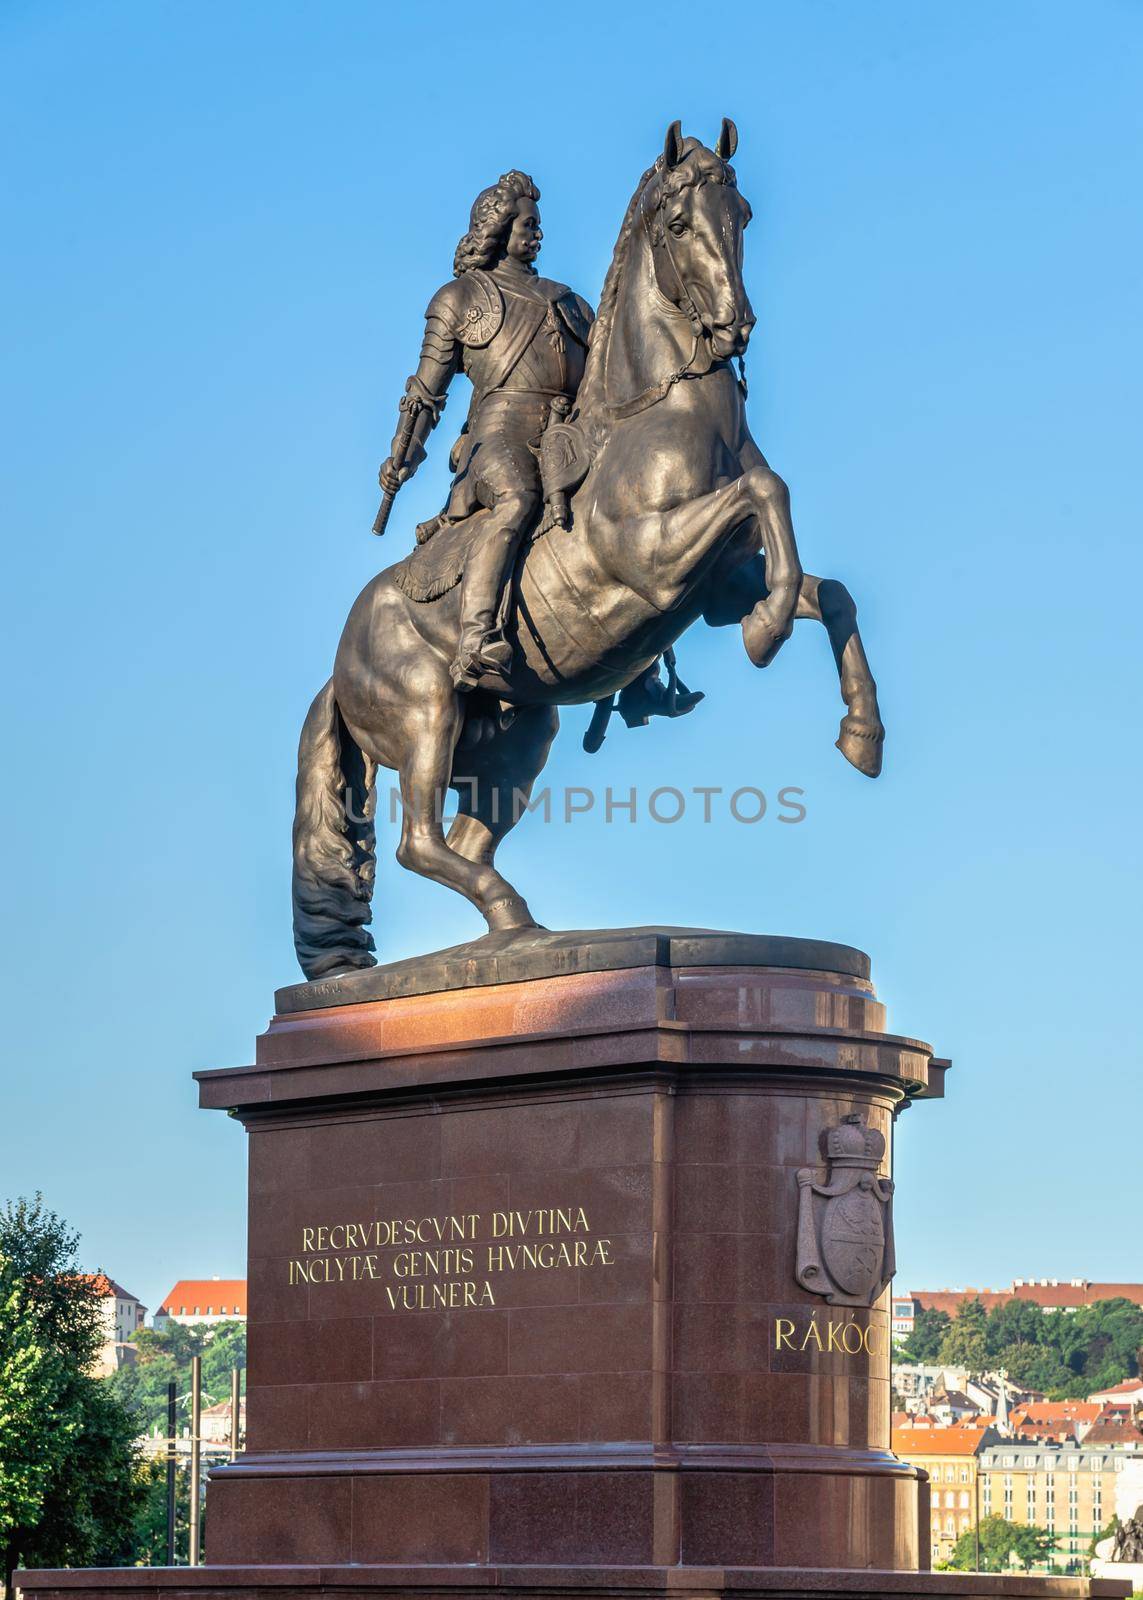 Budapest, Hungary 18.08.2021. Equestrian statue of Rakoczi Ferenc in Budapest, Hungary, on a sunny summer morning